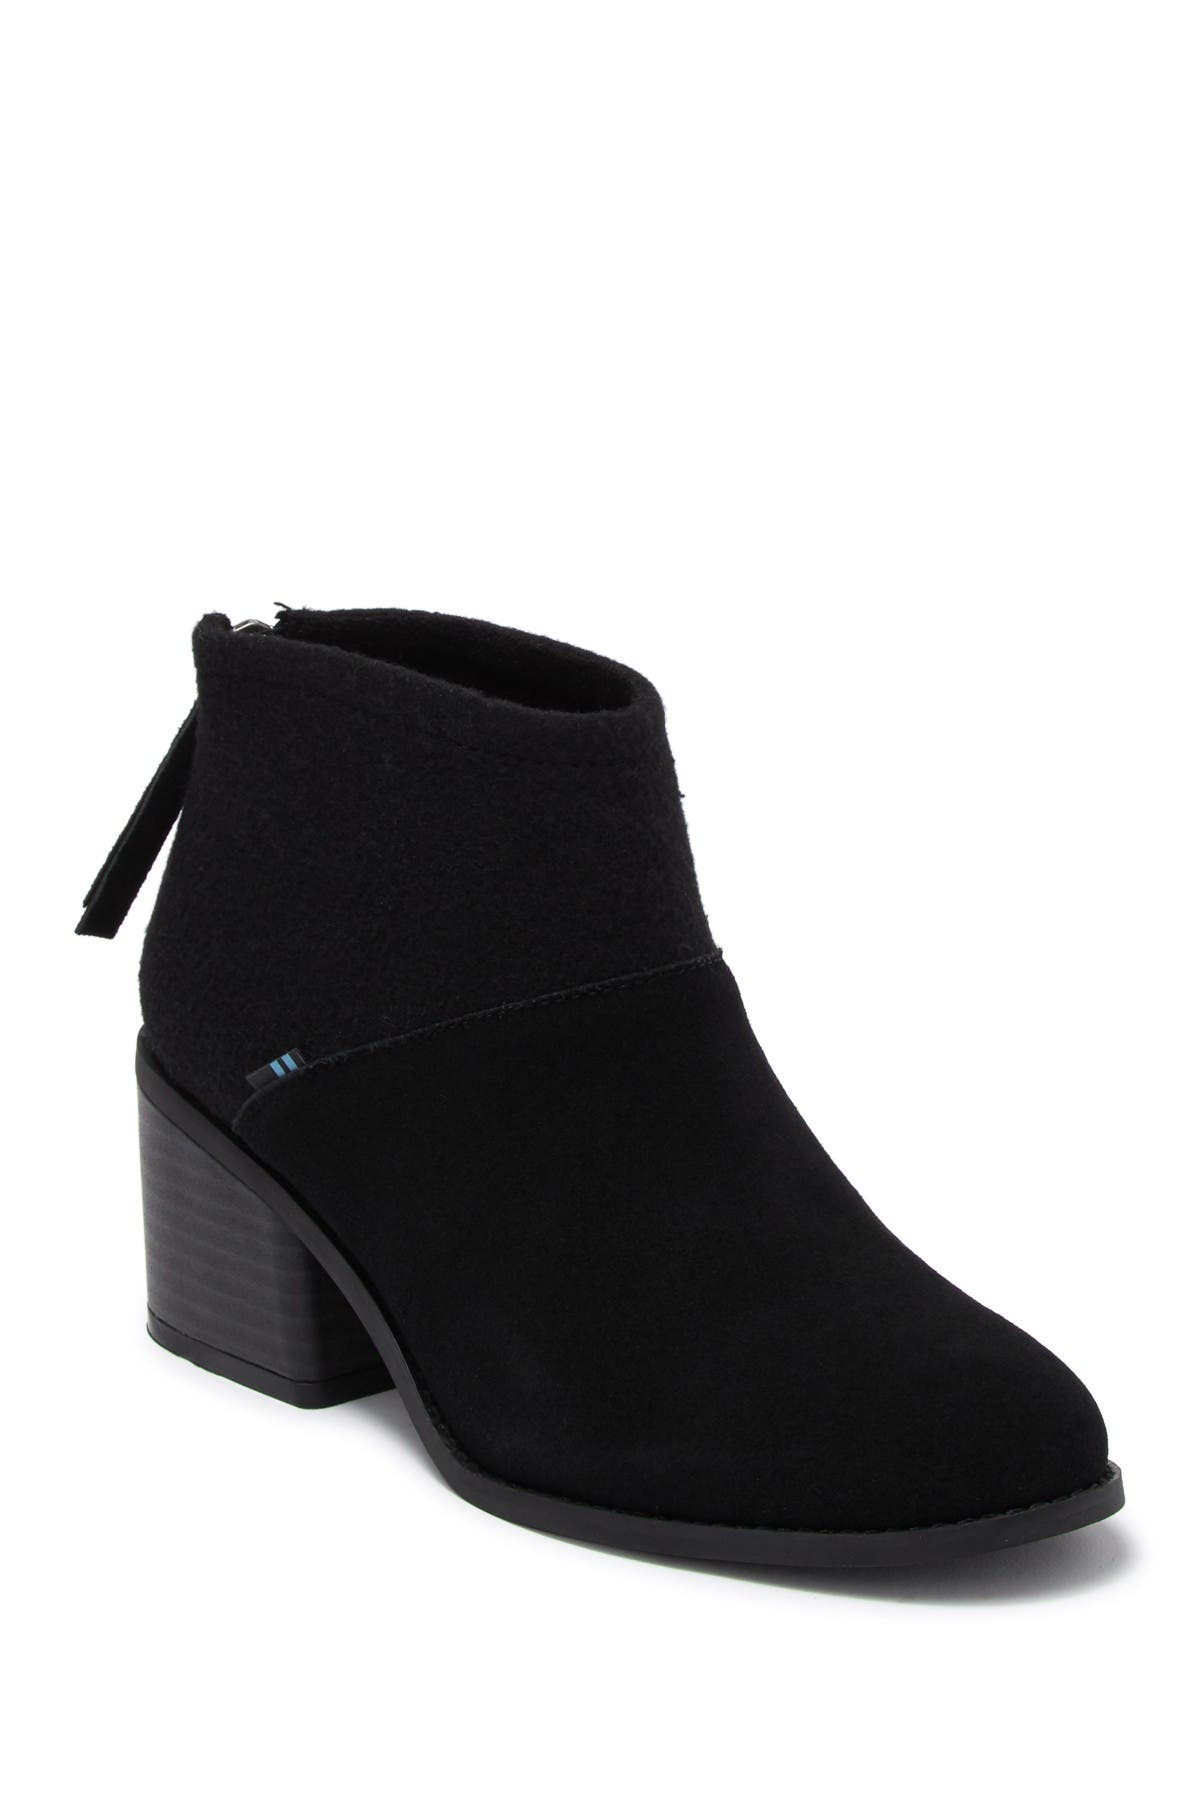 toms lacy bootie